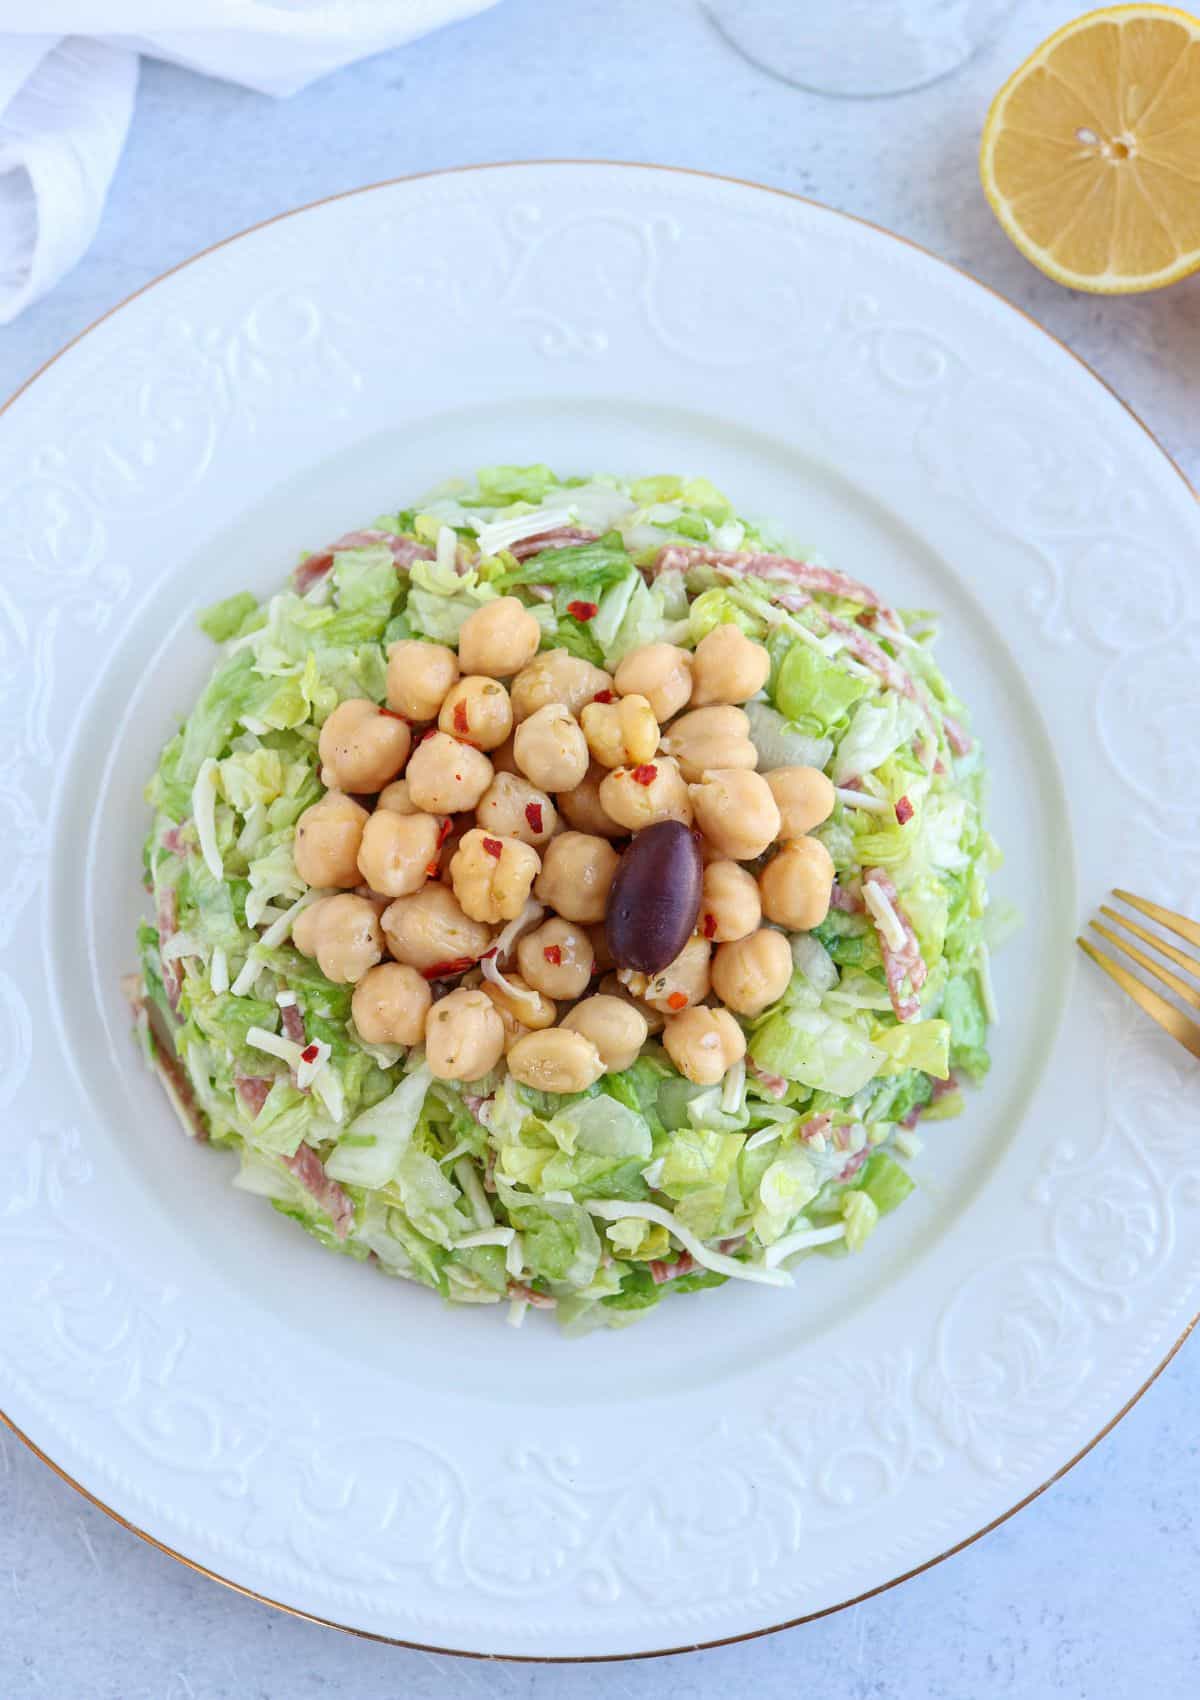 chopped salad with salami, mozzarella and marinated chickpeas on top on a white plate, overhead view.